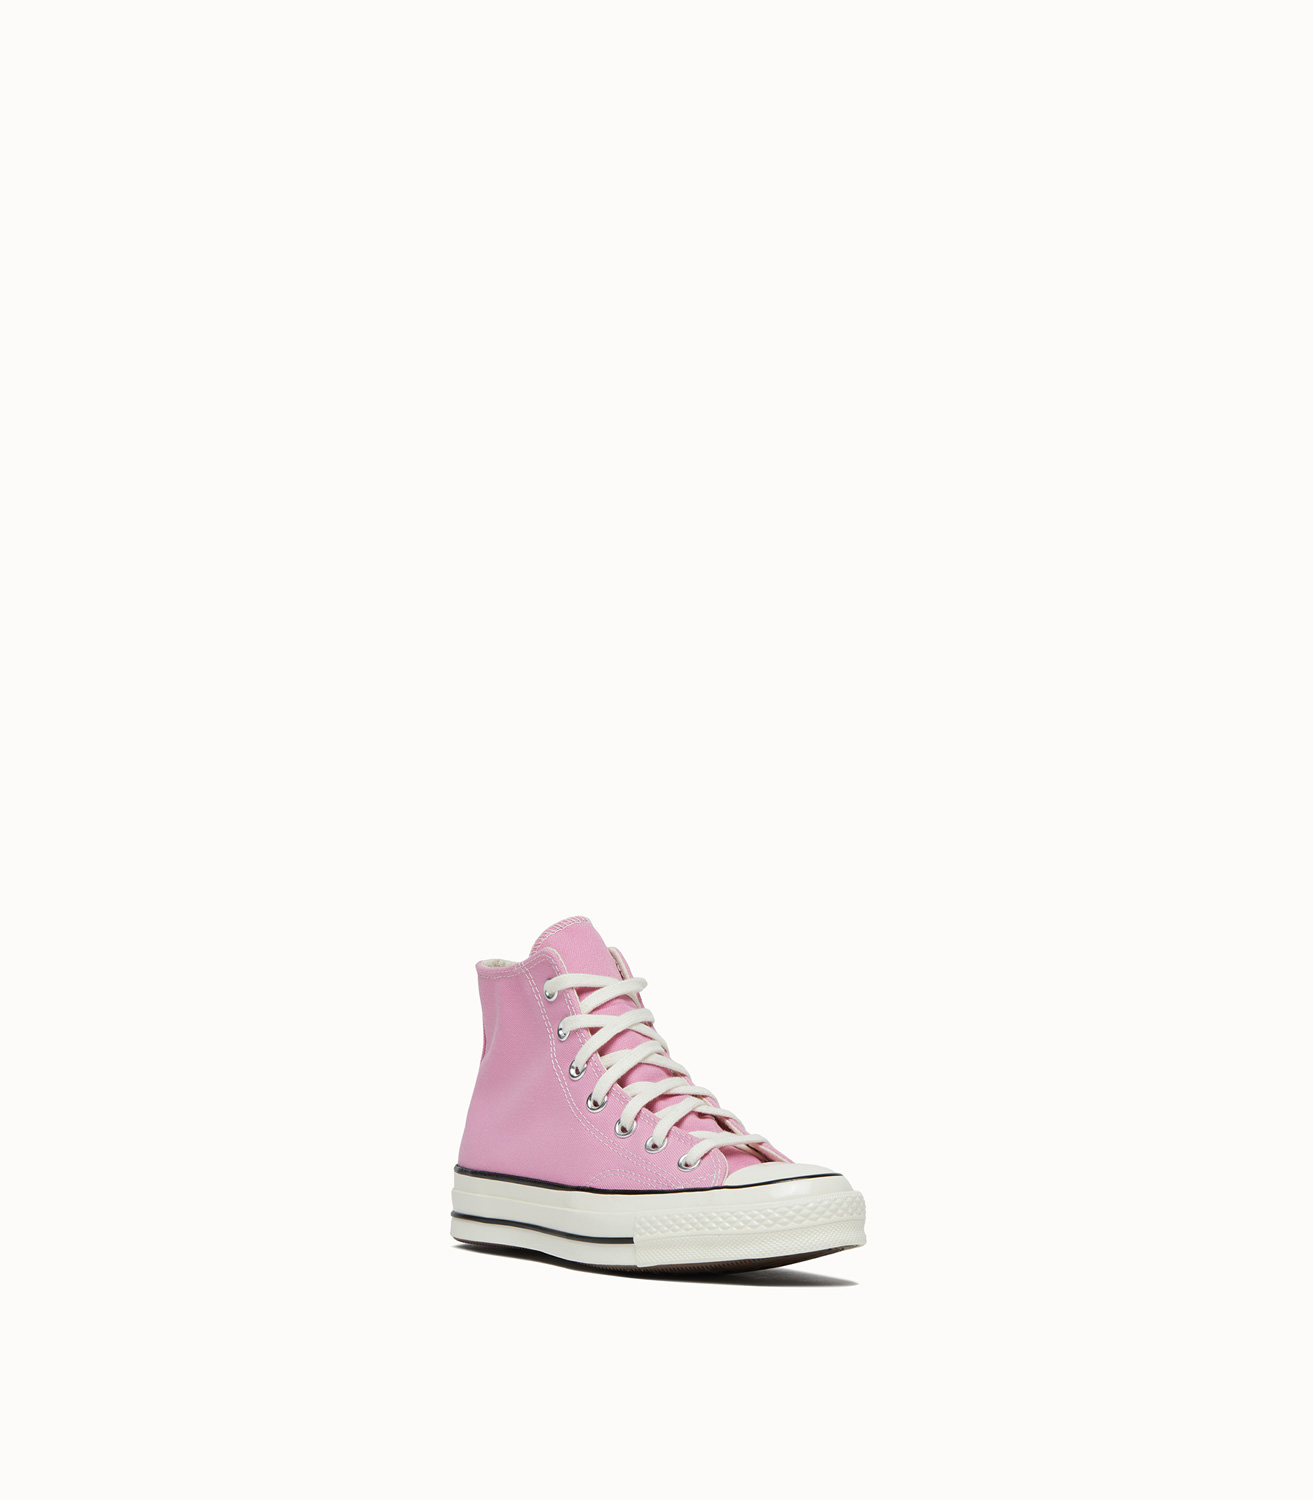 CONVERSE CHUCK 70 HI SNEAKERS COLOR PINK | Playground